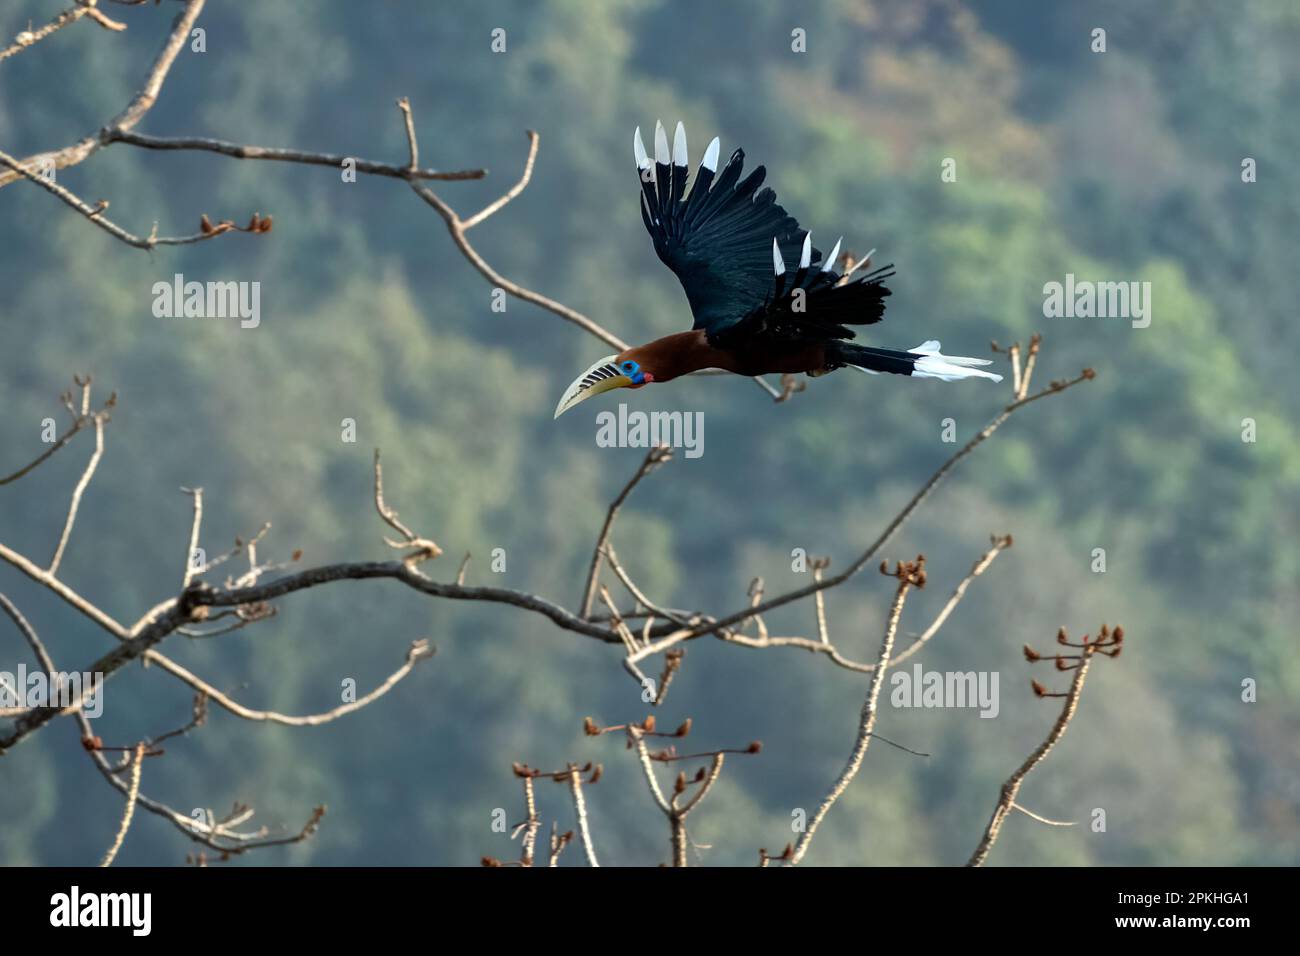 A male rufous-necked hornbill (Aceros nipalensis) observed in Latpanchar in West Bengal, India Stock Photo